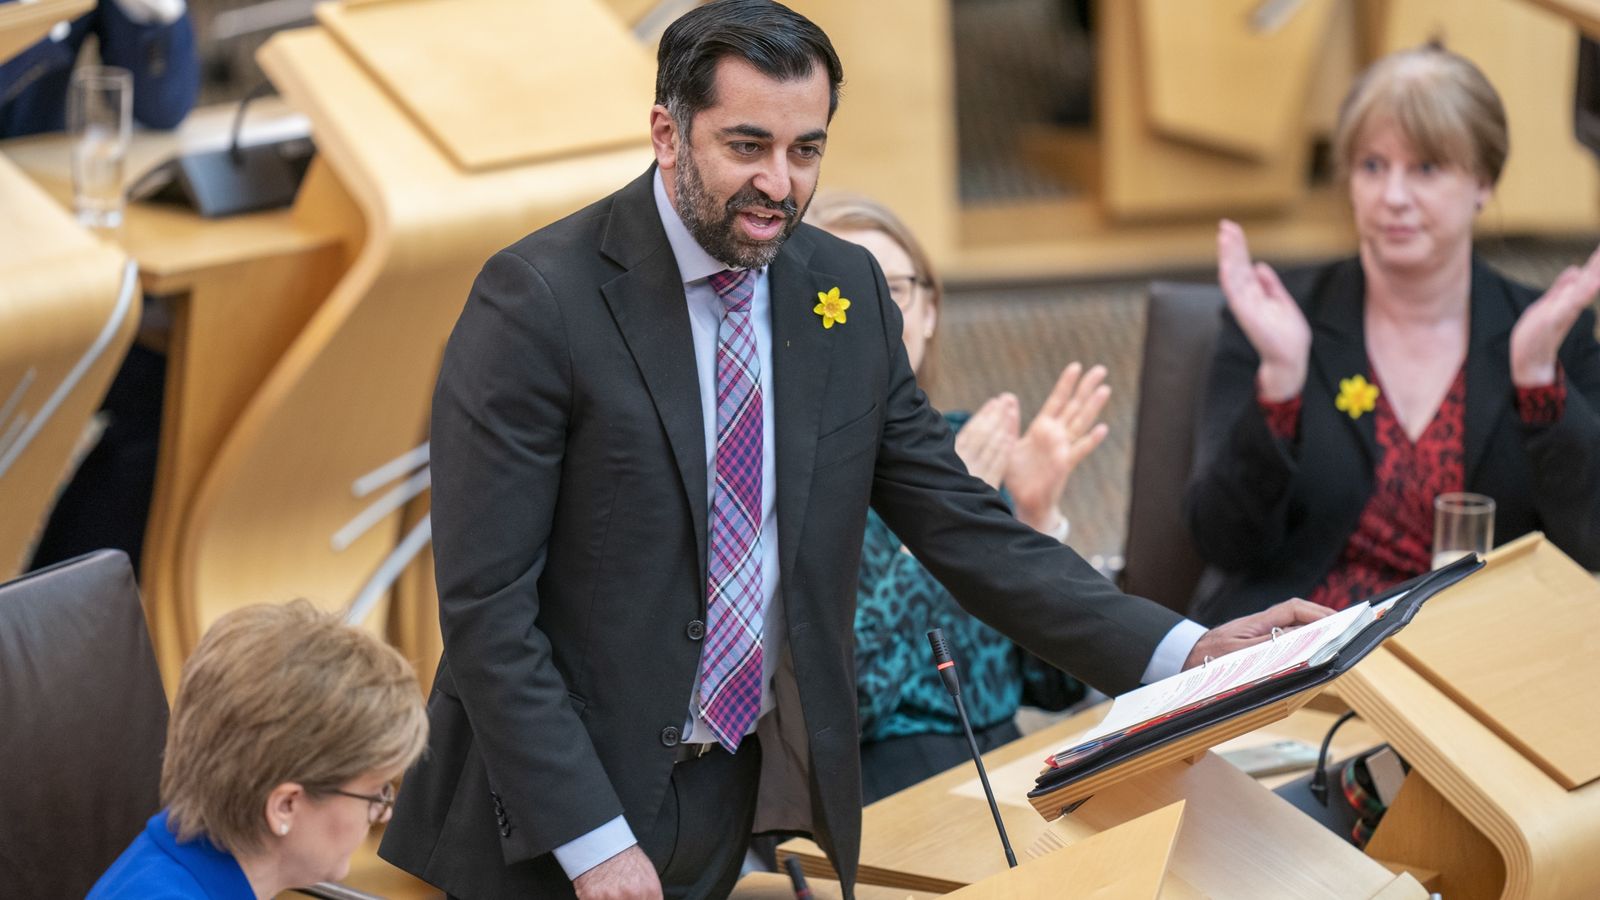 Humza Yousaf's leadership win is a big victory for the SNP establishment but old issues must be tackled